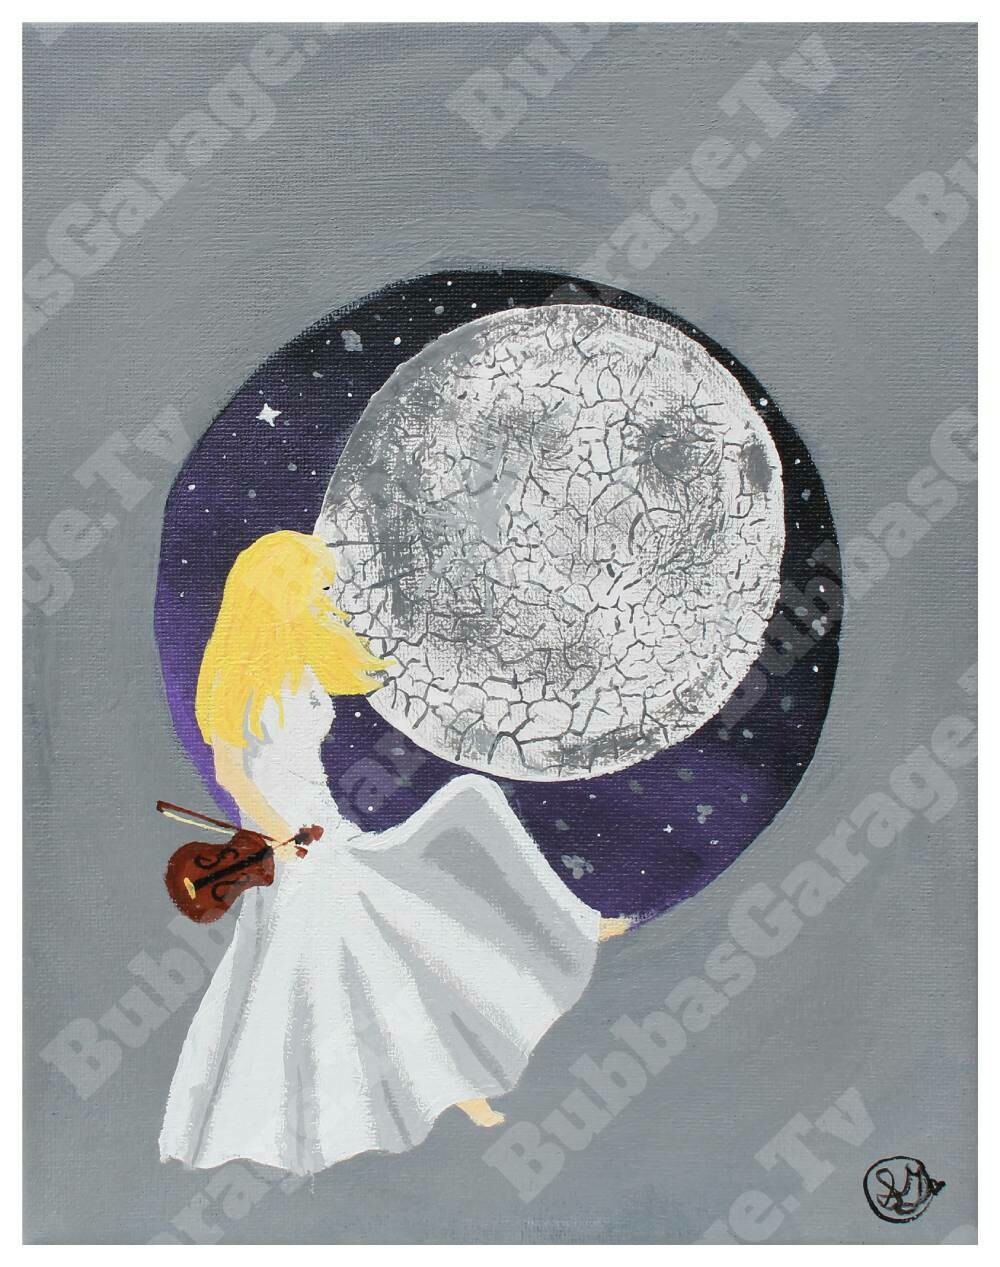 BubbasGarageTv - The Girl and The Moon 11x14 Wall Art Print - by Shelby